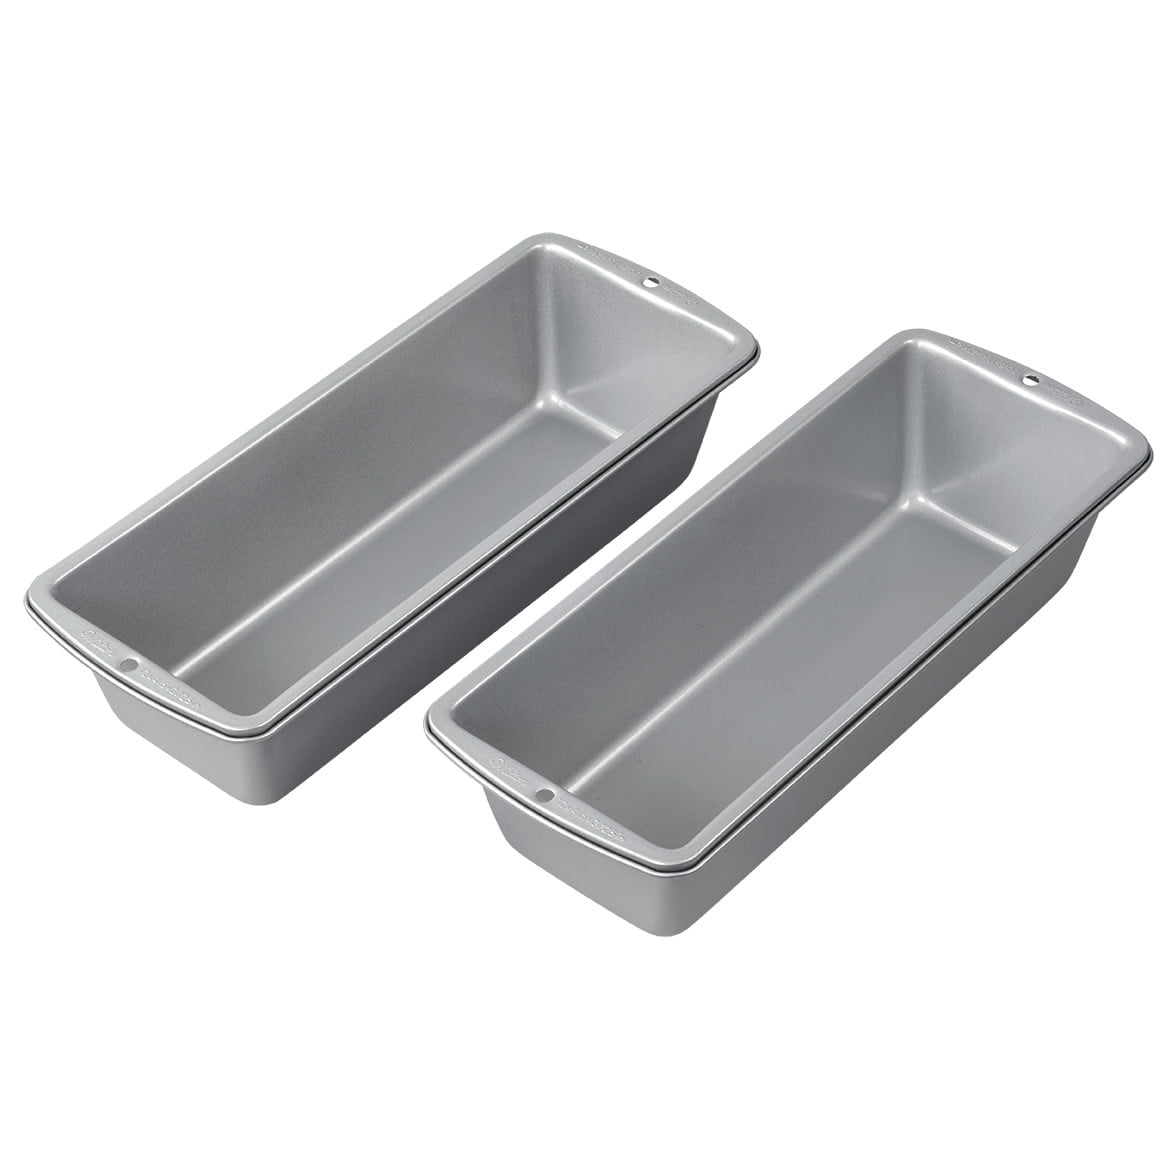 LIANYU 3 Pack Loaf Pans for Baking Bread, 9x5 Inch Bread Pan, Bread Loaf  Pan for Baking, Stainless Steel Meatloaf Baking Pan, Loaf Tin Pan for